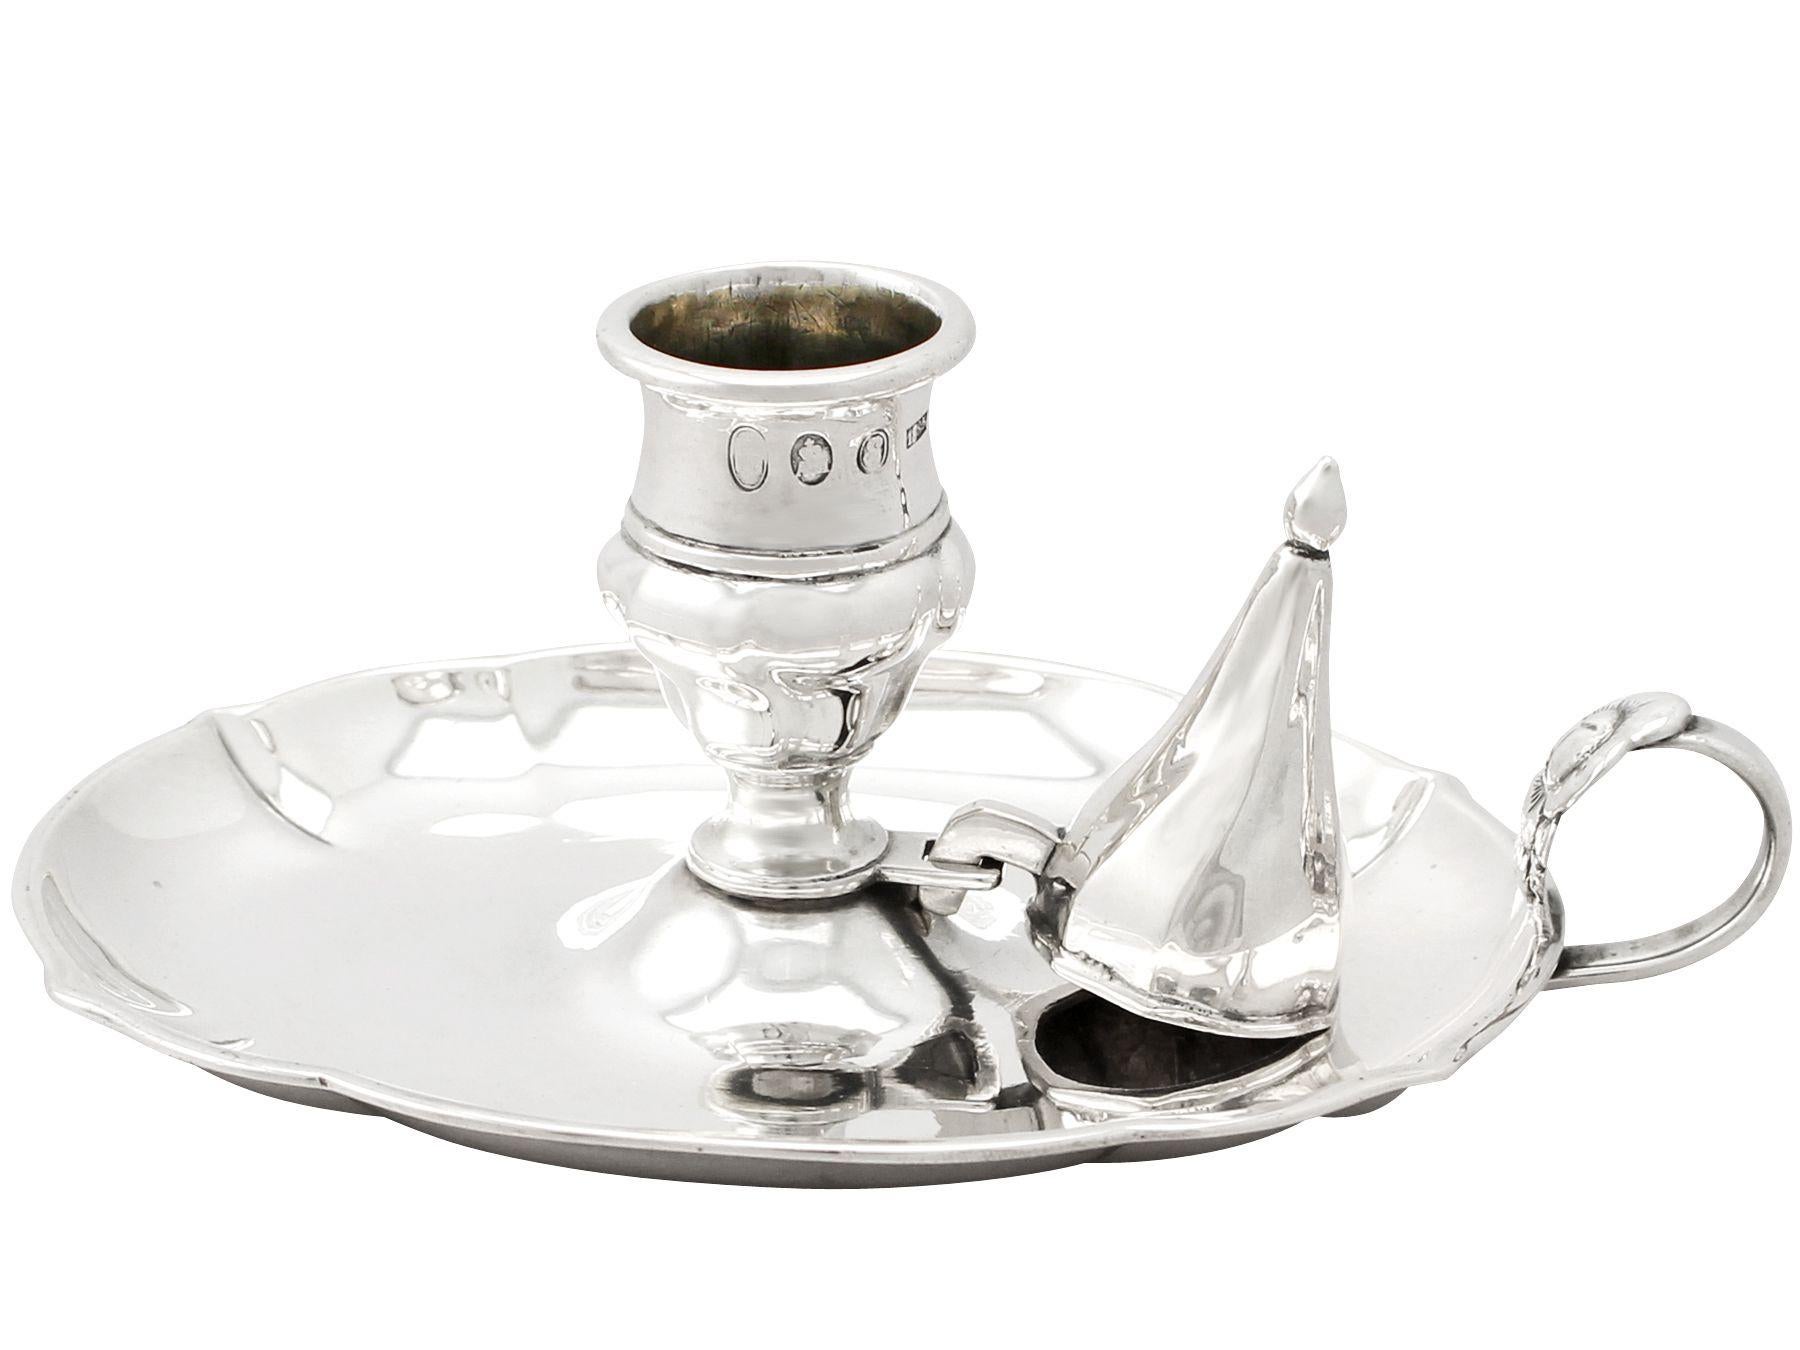 Antique Danish Silver Chamber Candlestick In Excellent Condition For Sale In Jesmond, Newcastle Upon Tyne